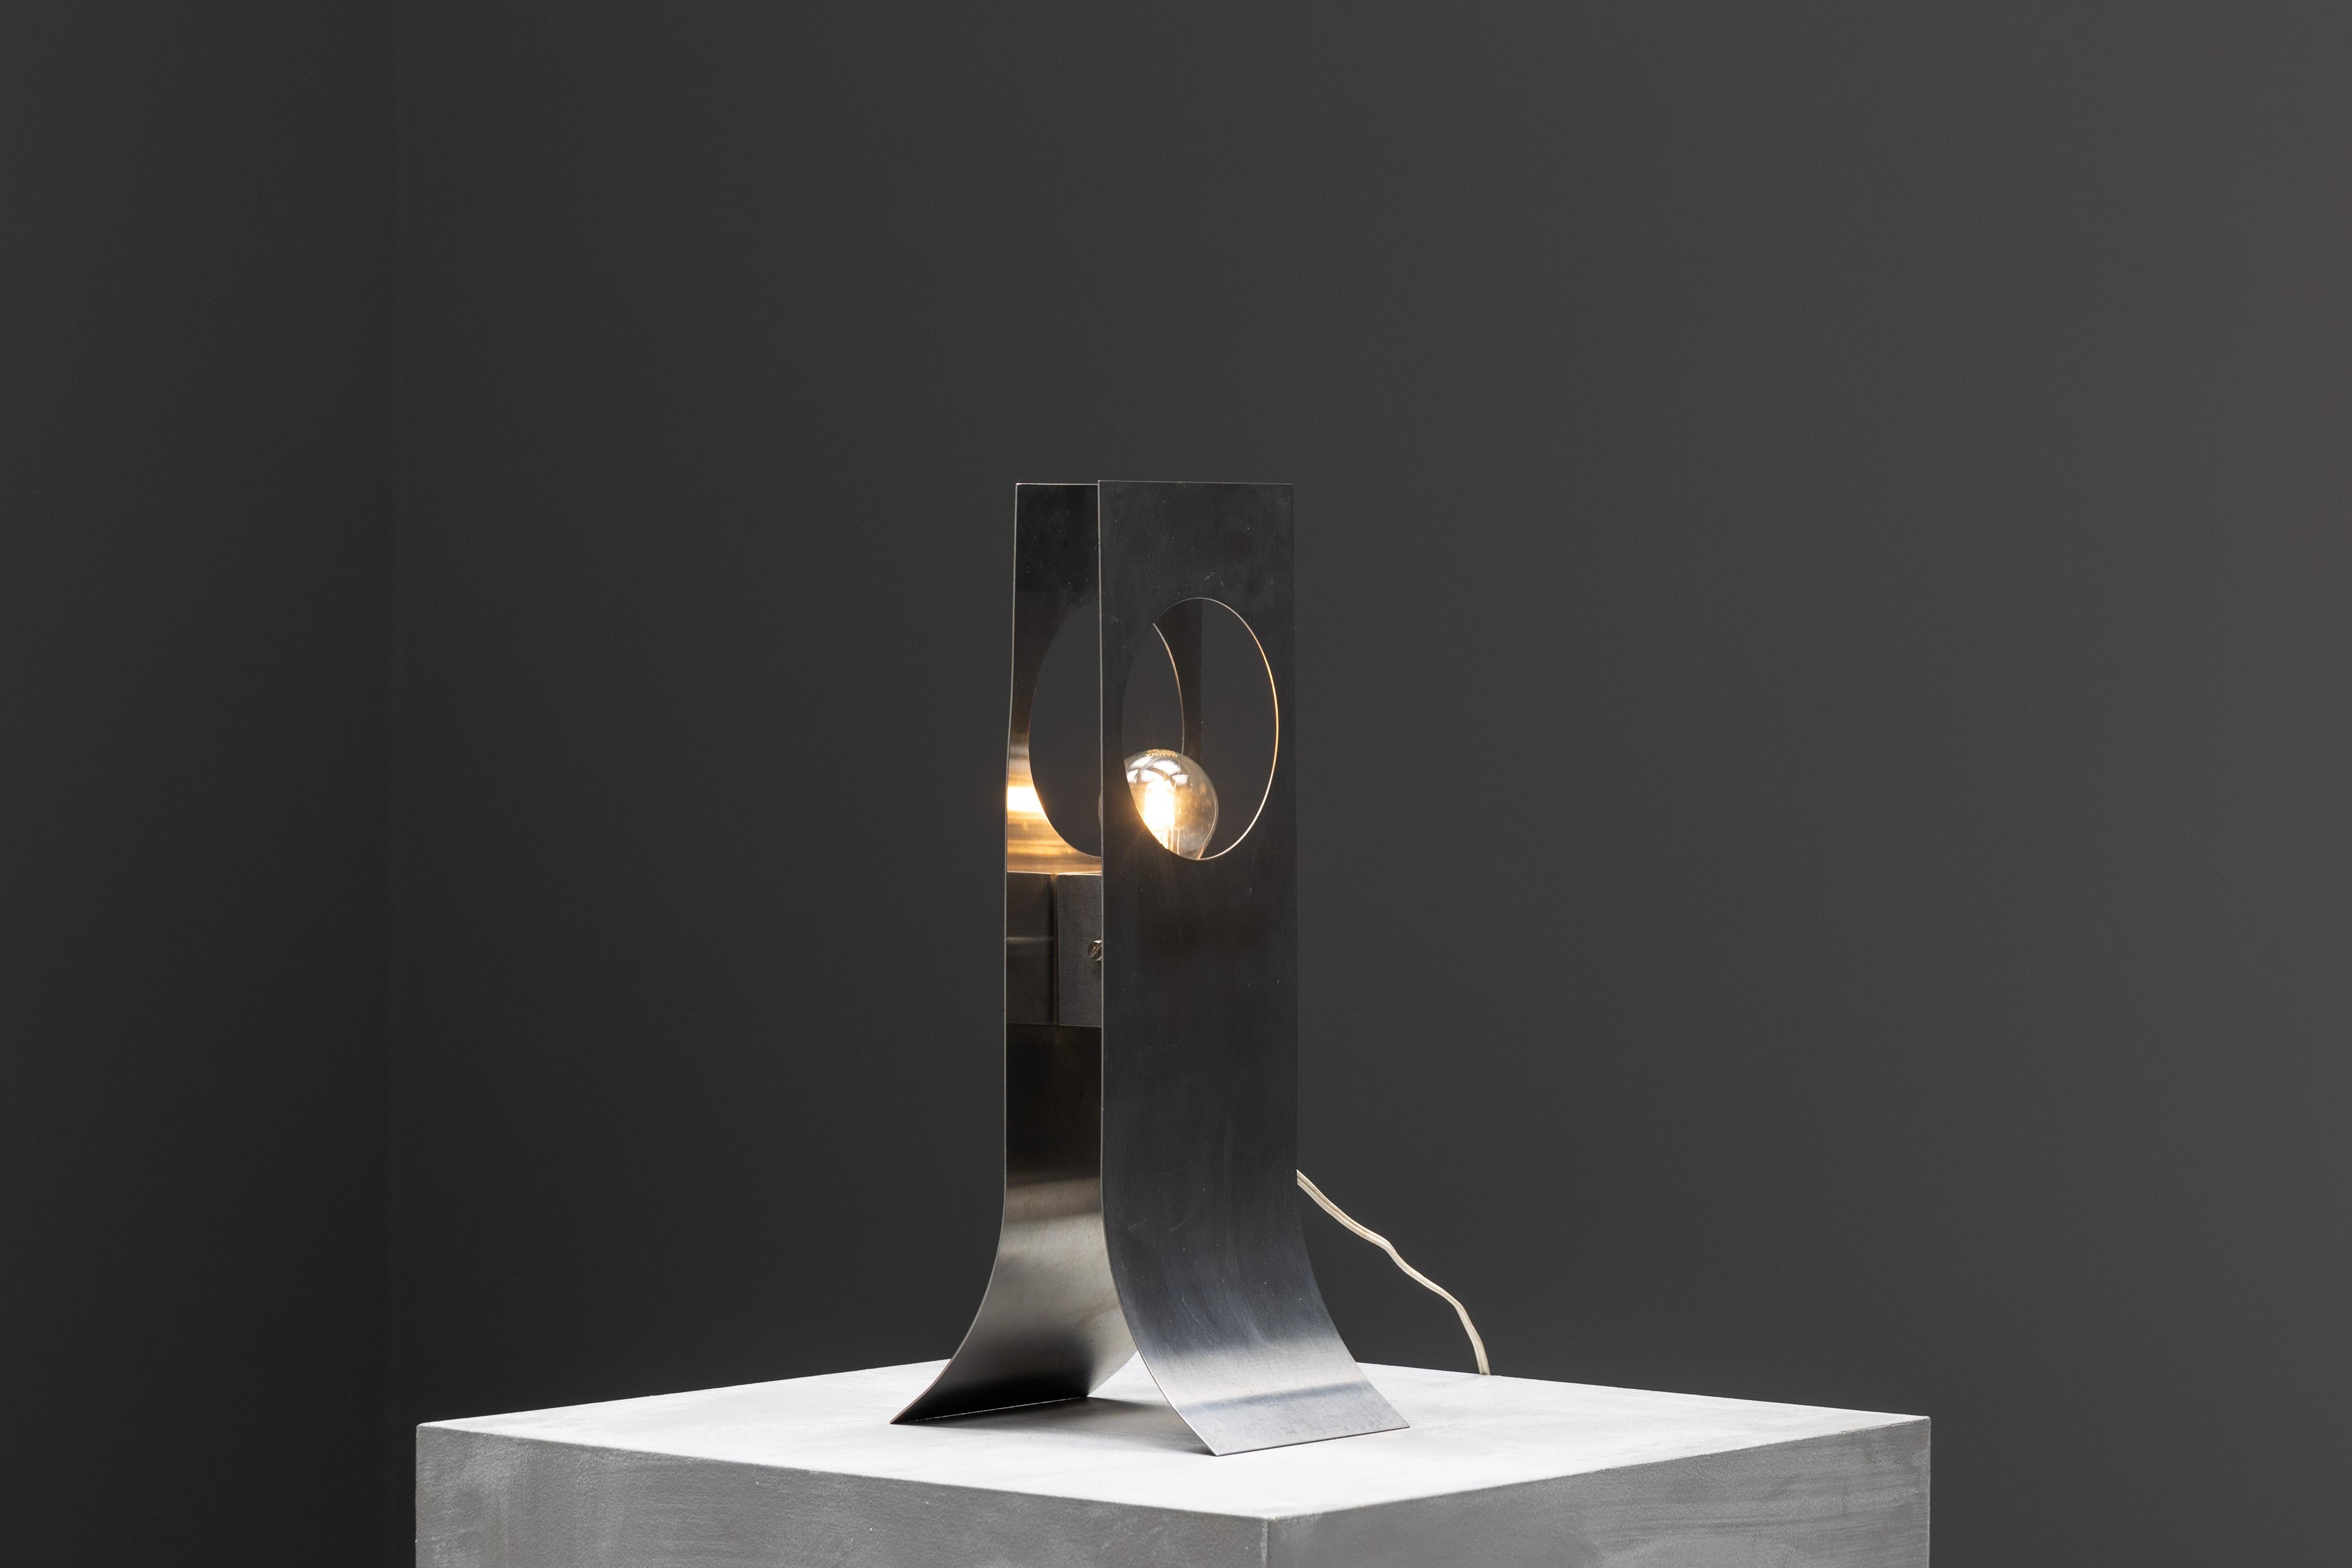 Stainless steel table lamp by François Monnet, an iconic piece first introduced in 1969 and edited by Kappa. It embodies the essence of French space age design, characterised by its sleek chrome finish and futuristic silhouette. This lamp makes a